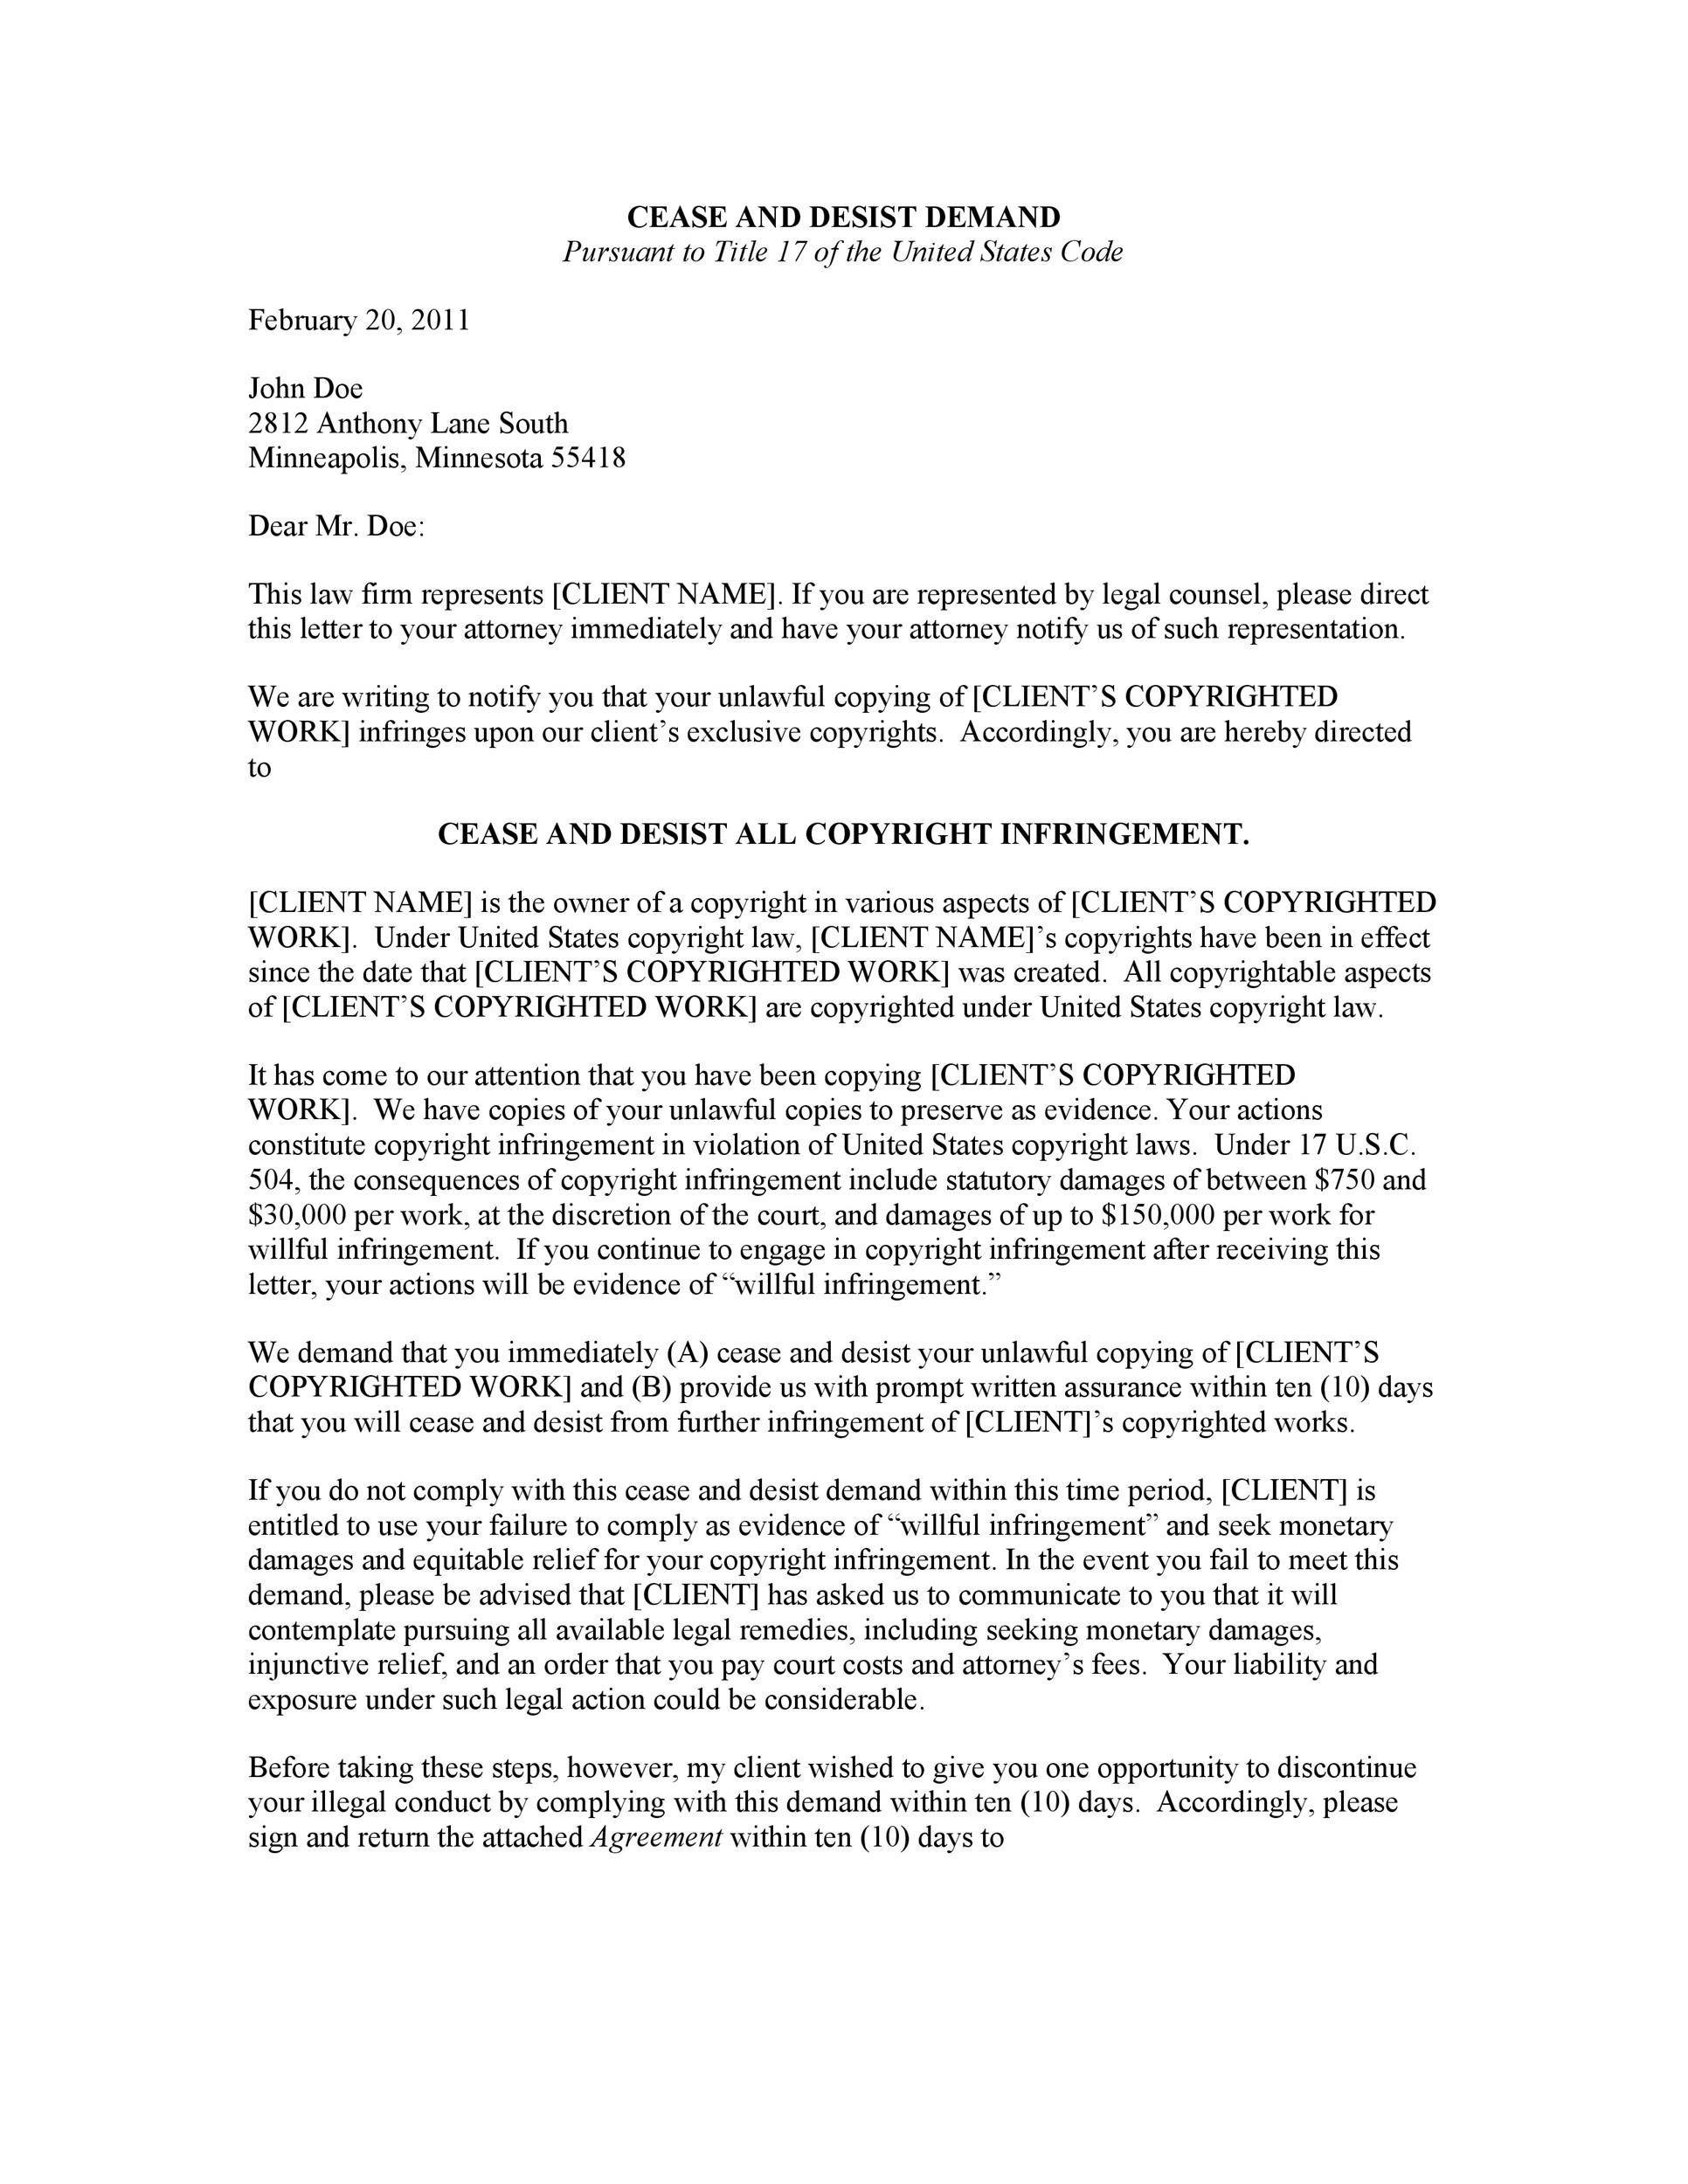 30 Cease And Desist Letter Templates Free Template Lab